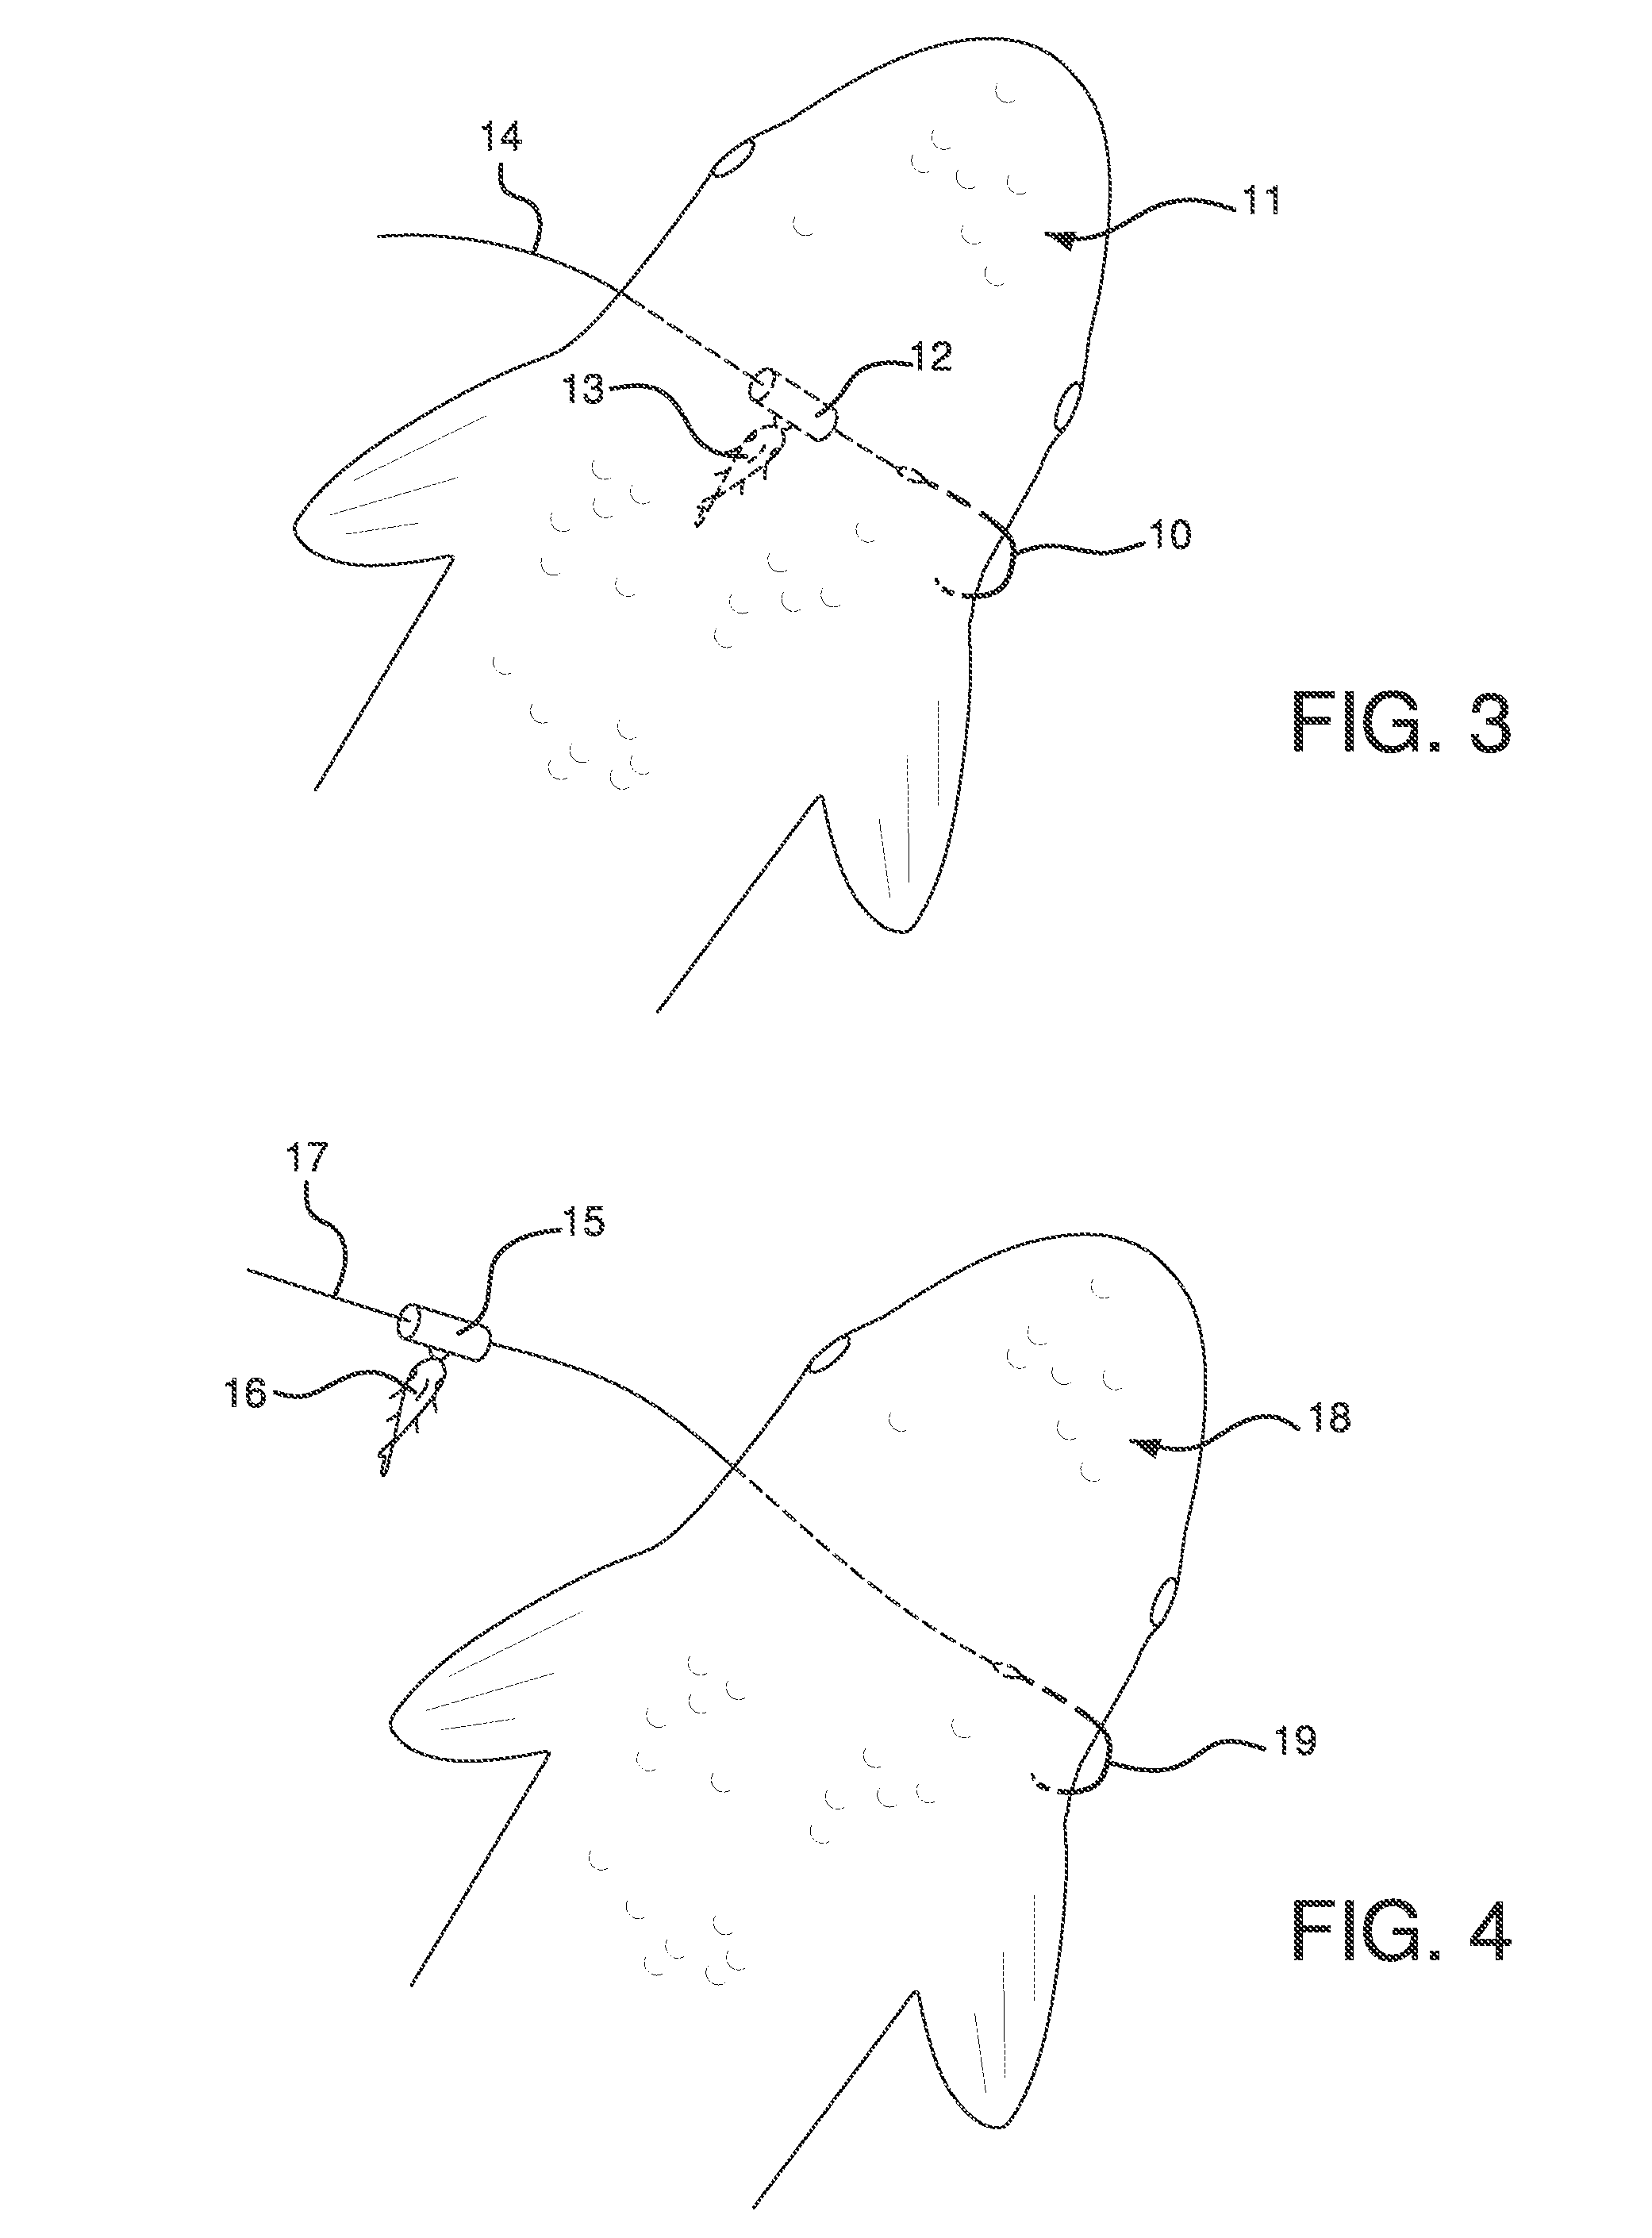 Method and Apparatus for Long Line and Recreational Bait Fishing